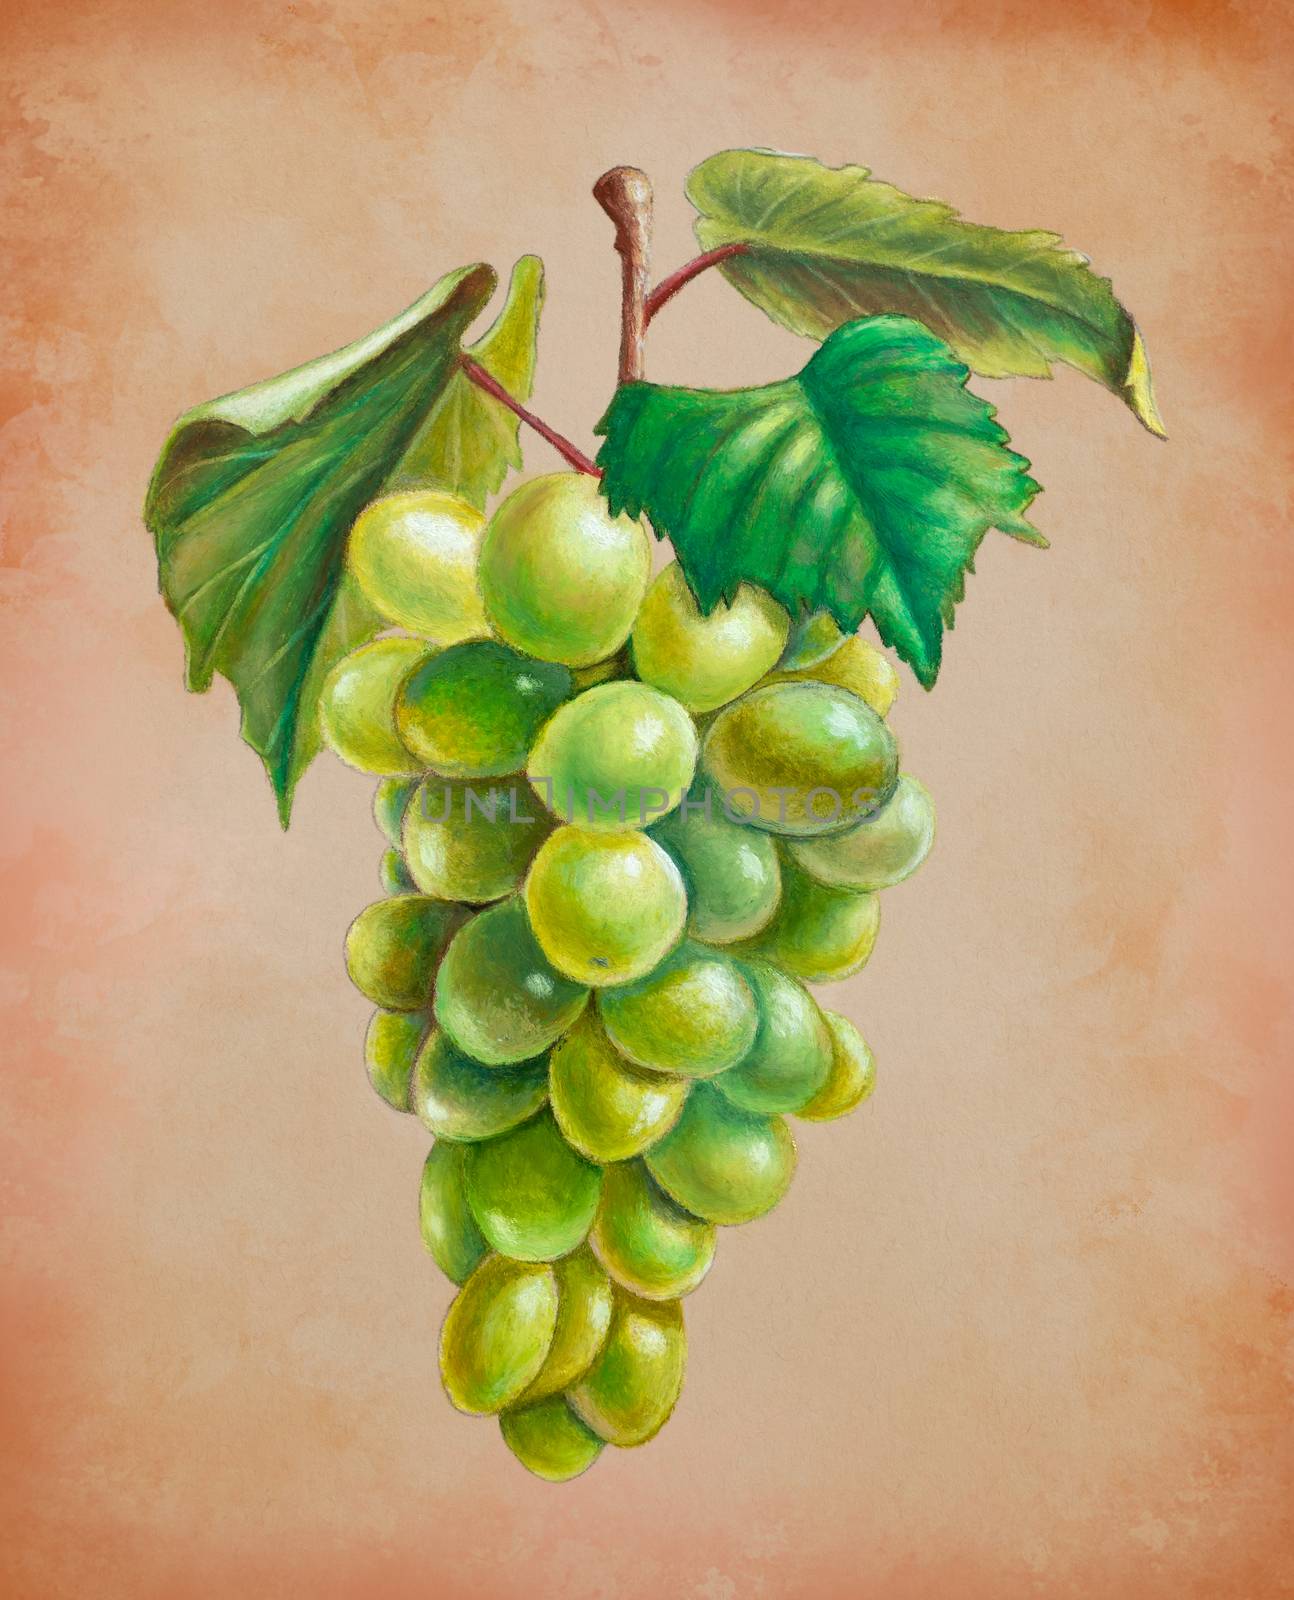 Oil pastel painting of some white grapes. Traditional illustration on toned paper.